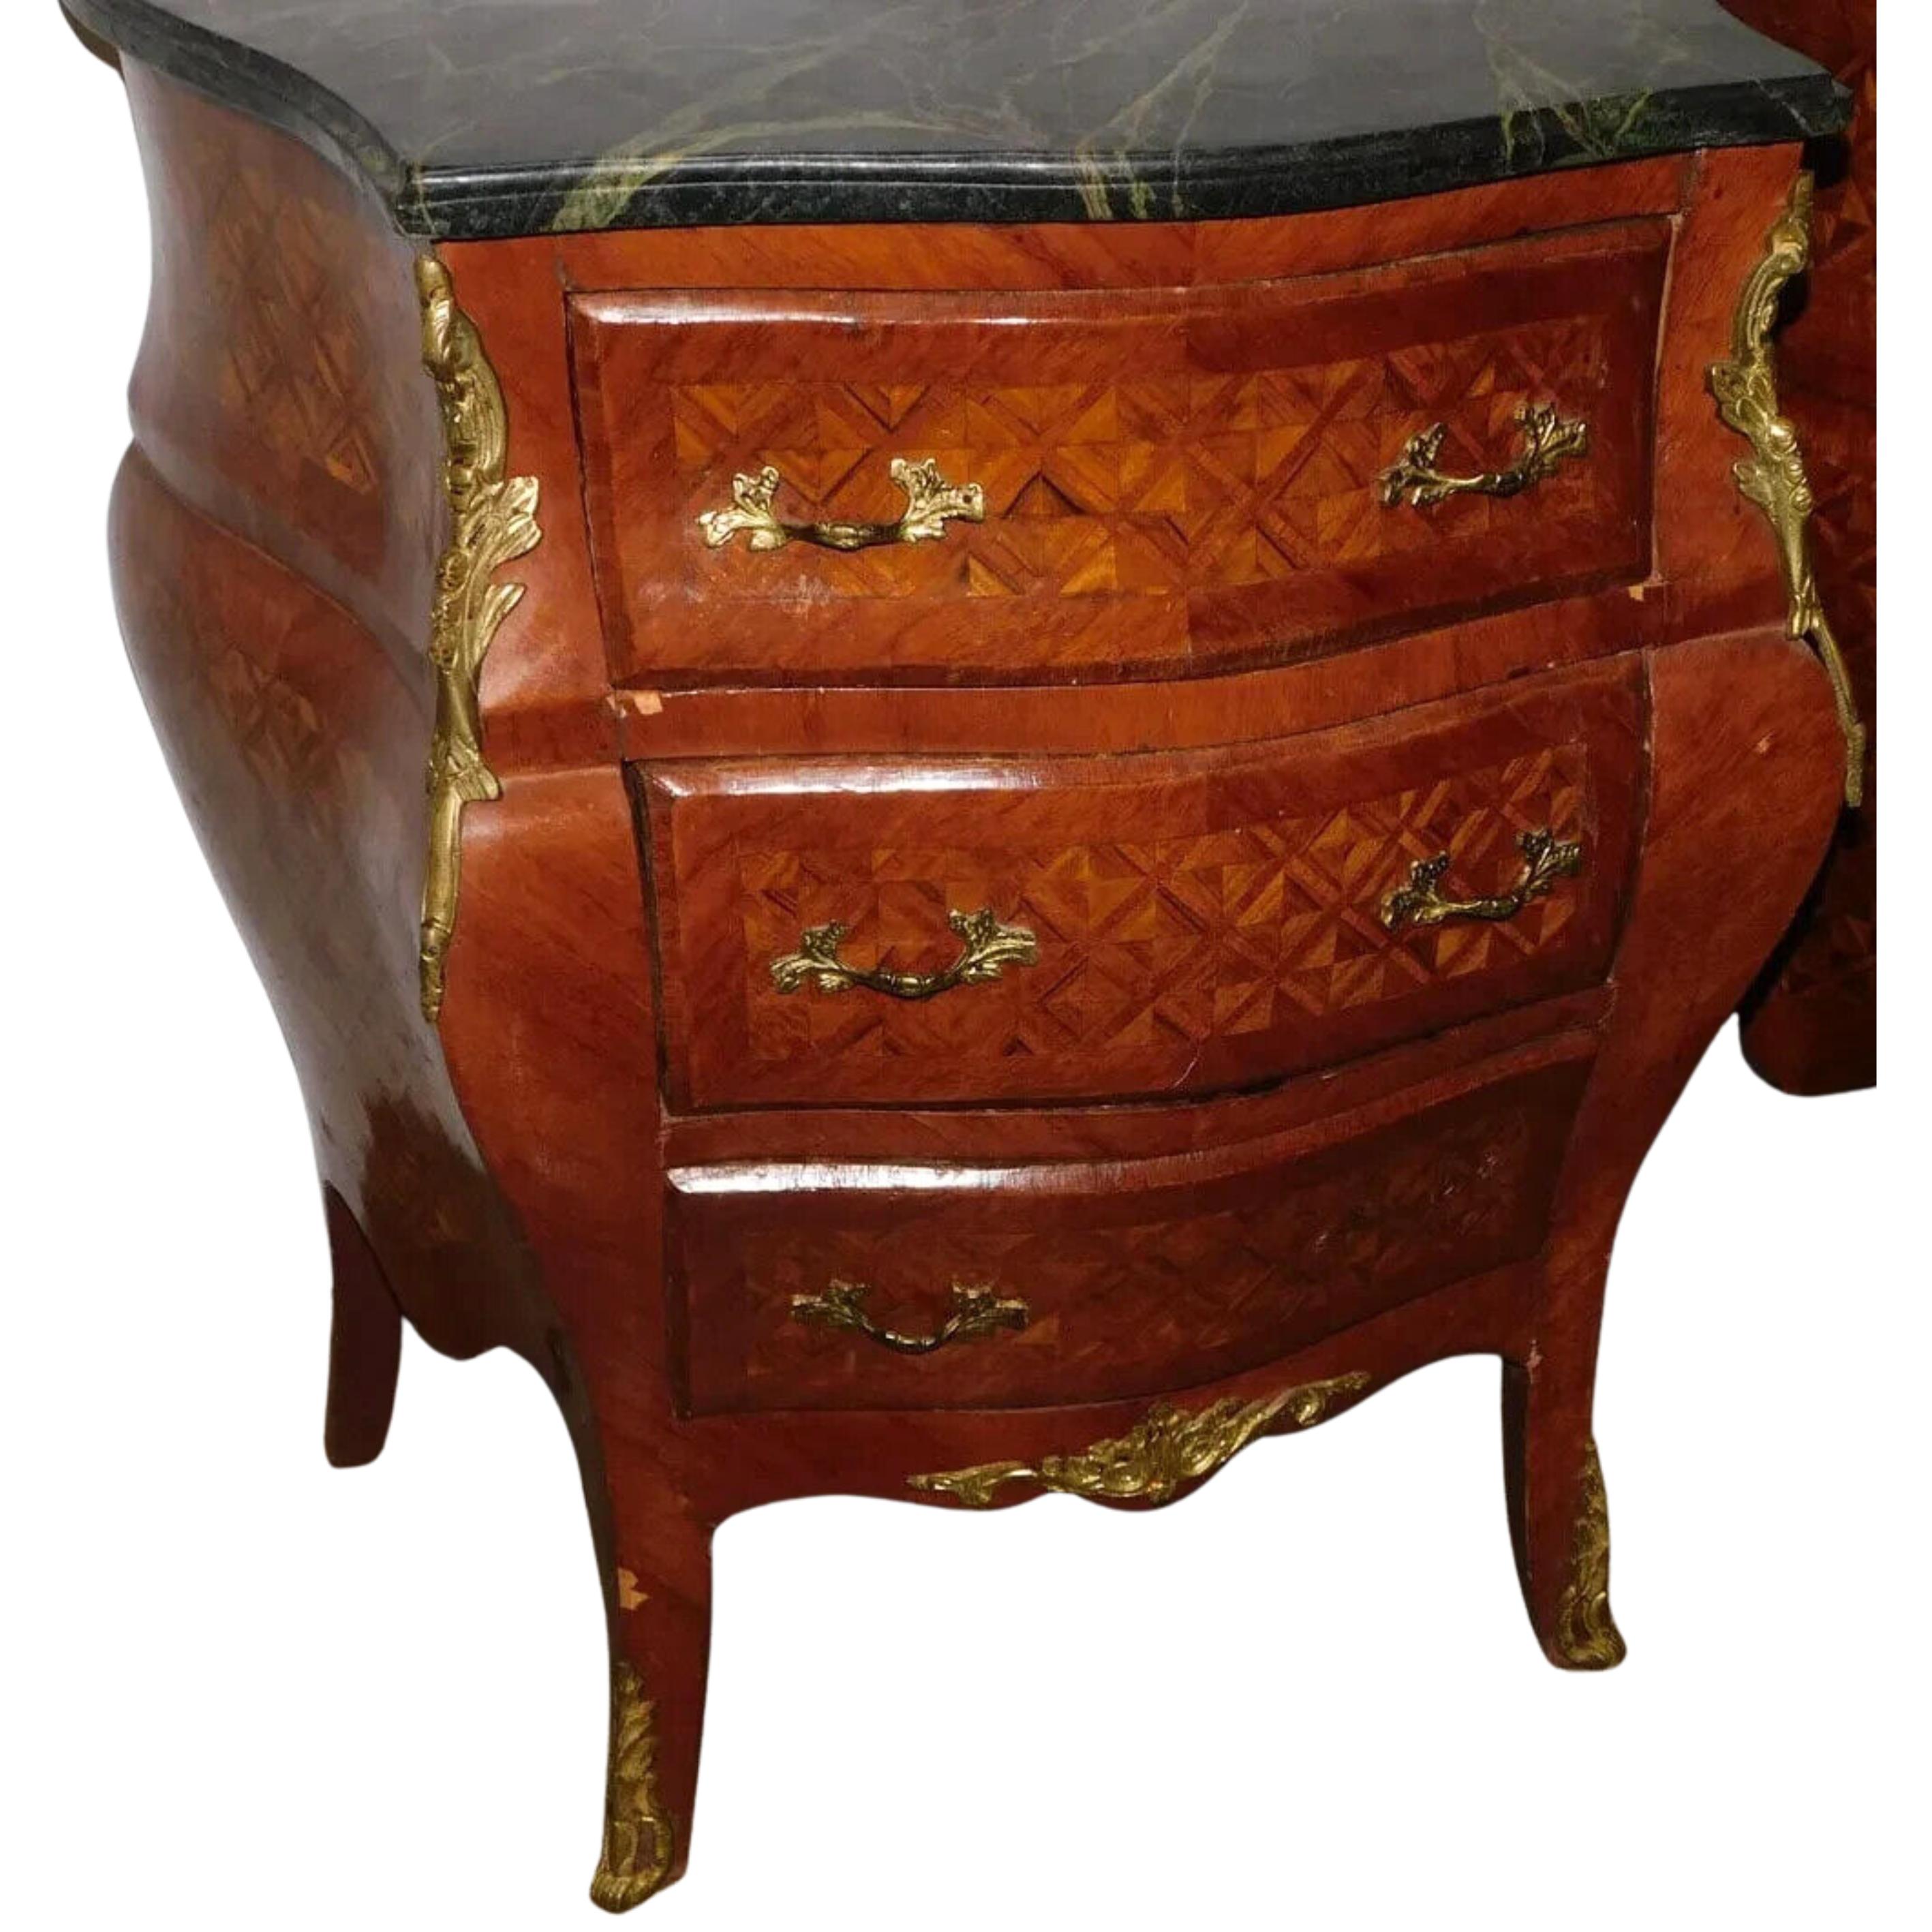 20th Century 20th C. Walnut Inlay, Marble Top, Diminutive, With Bronze Commodes, Set of Two! For Sale